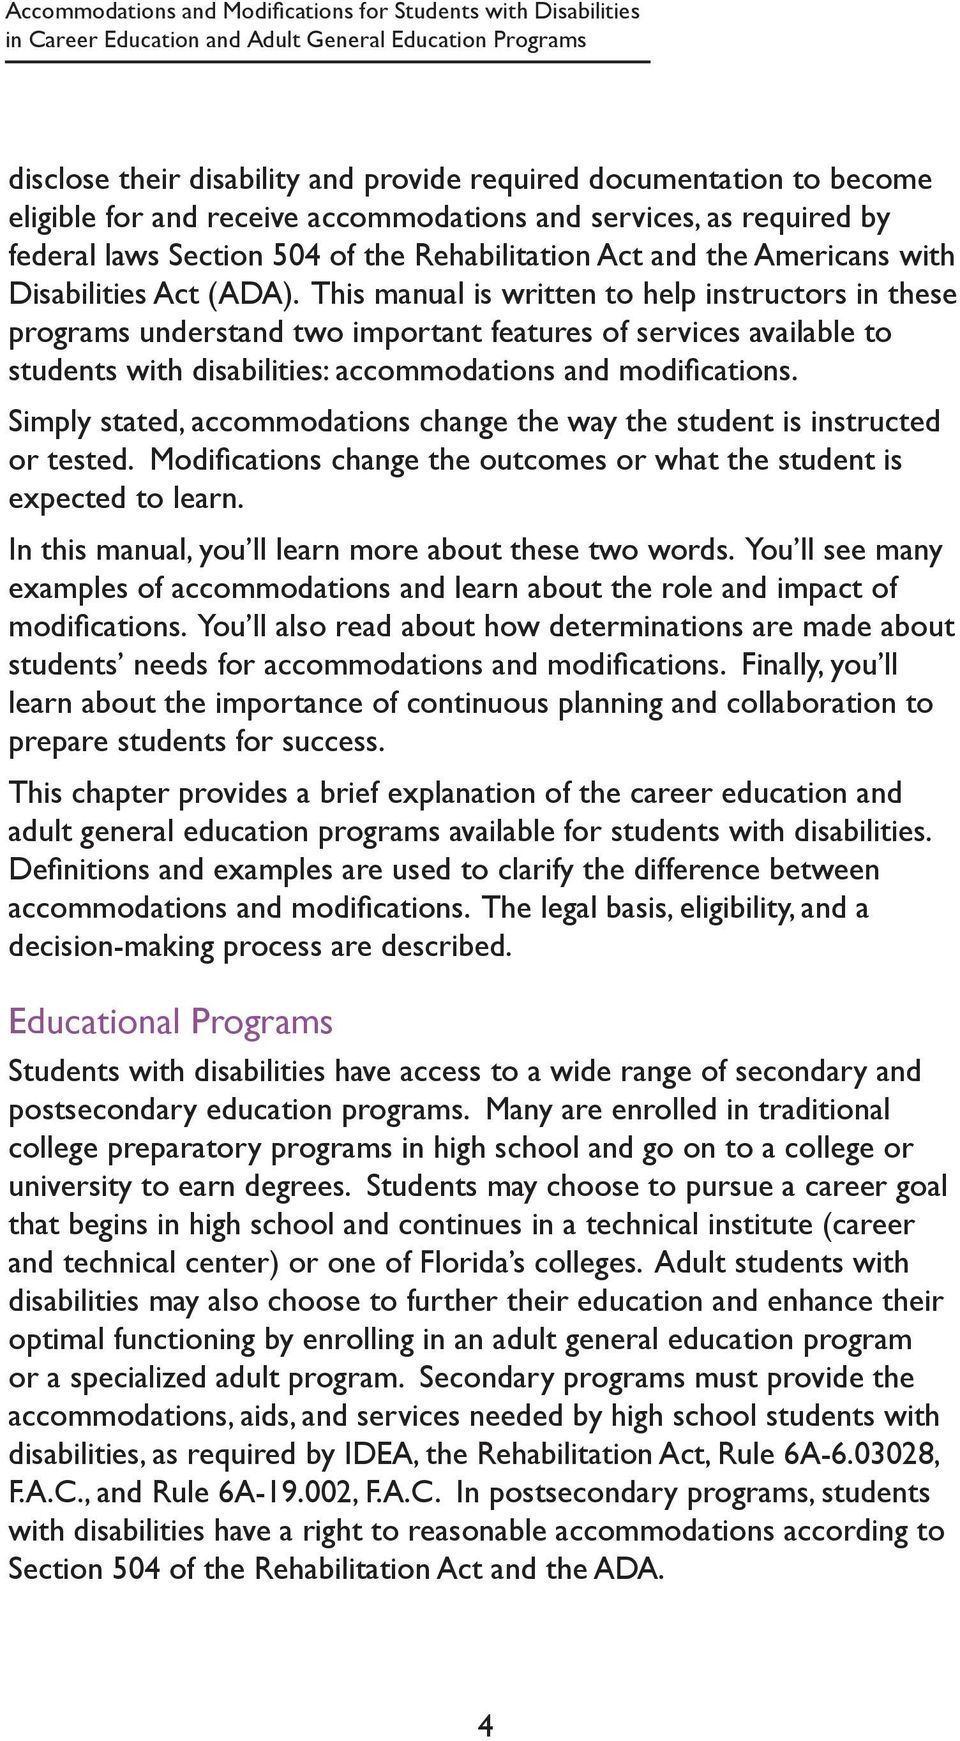 This manual is written to help instructors in these programs understand two important features of services available to students with disabilities: accommodations and modifications.